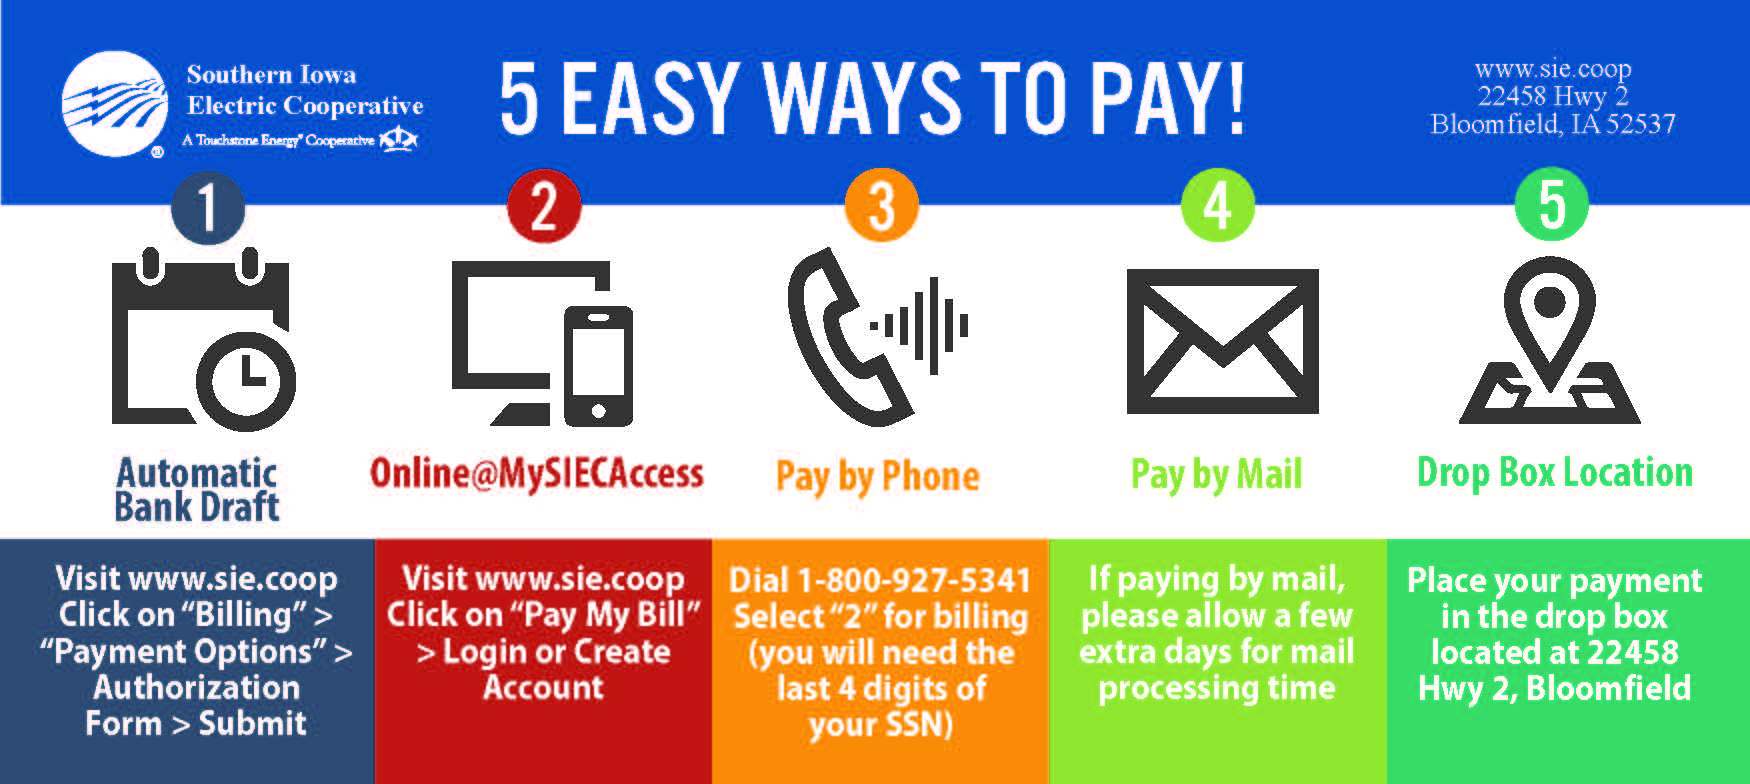 5 Easy Ways to Pay